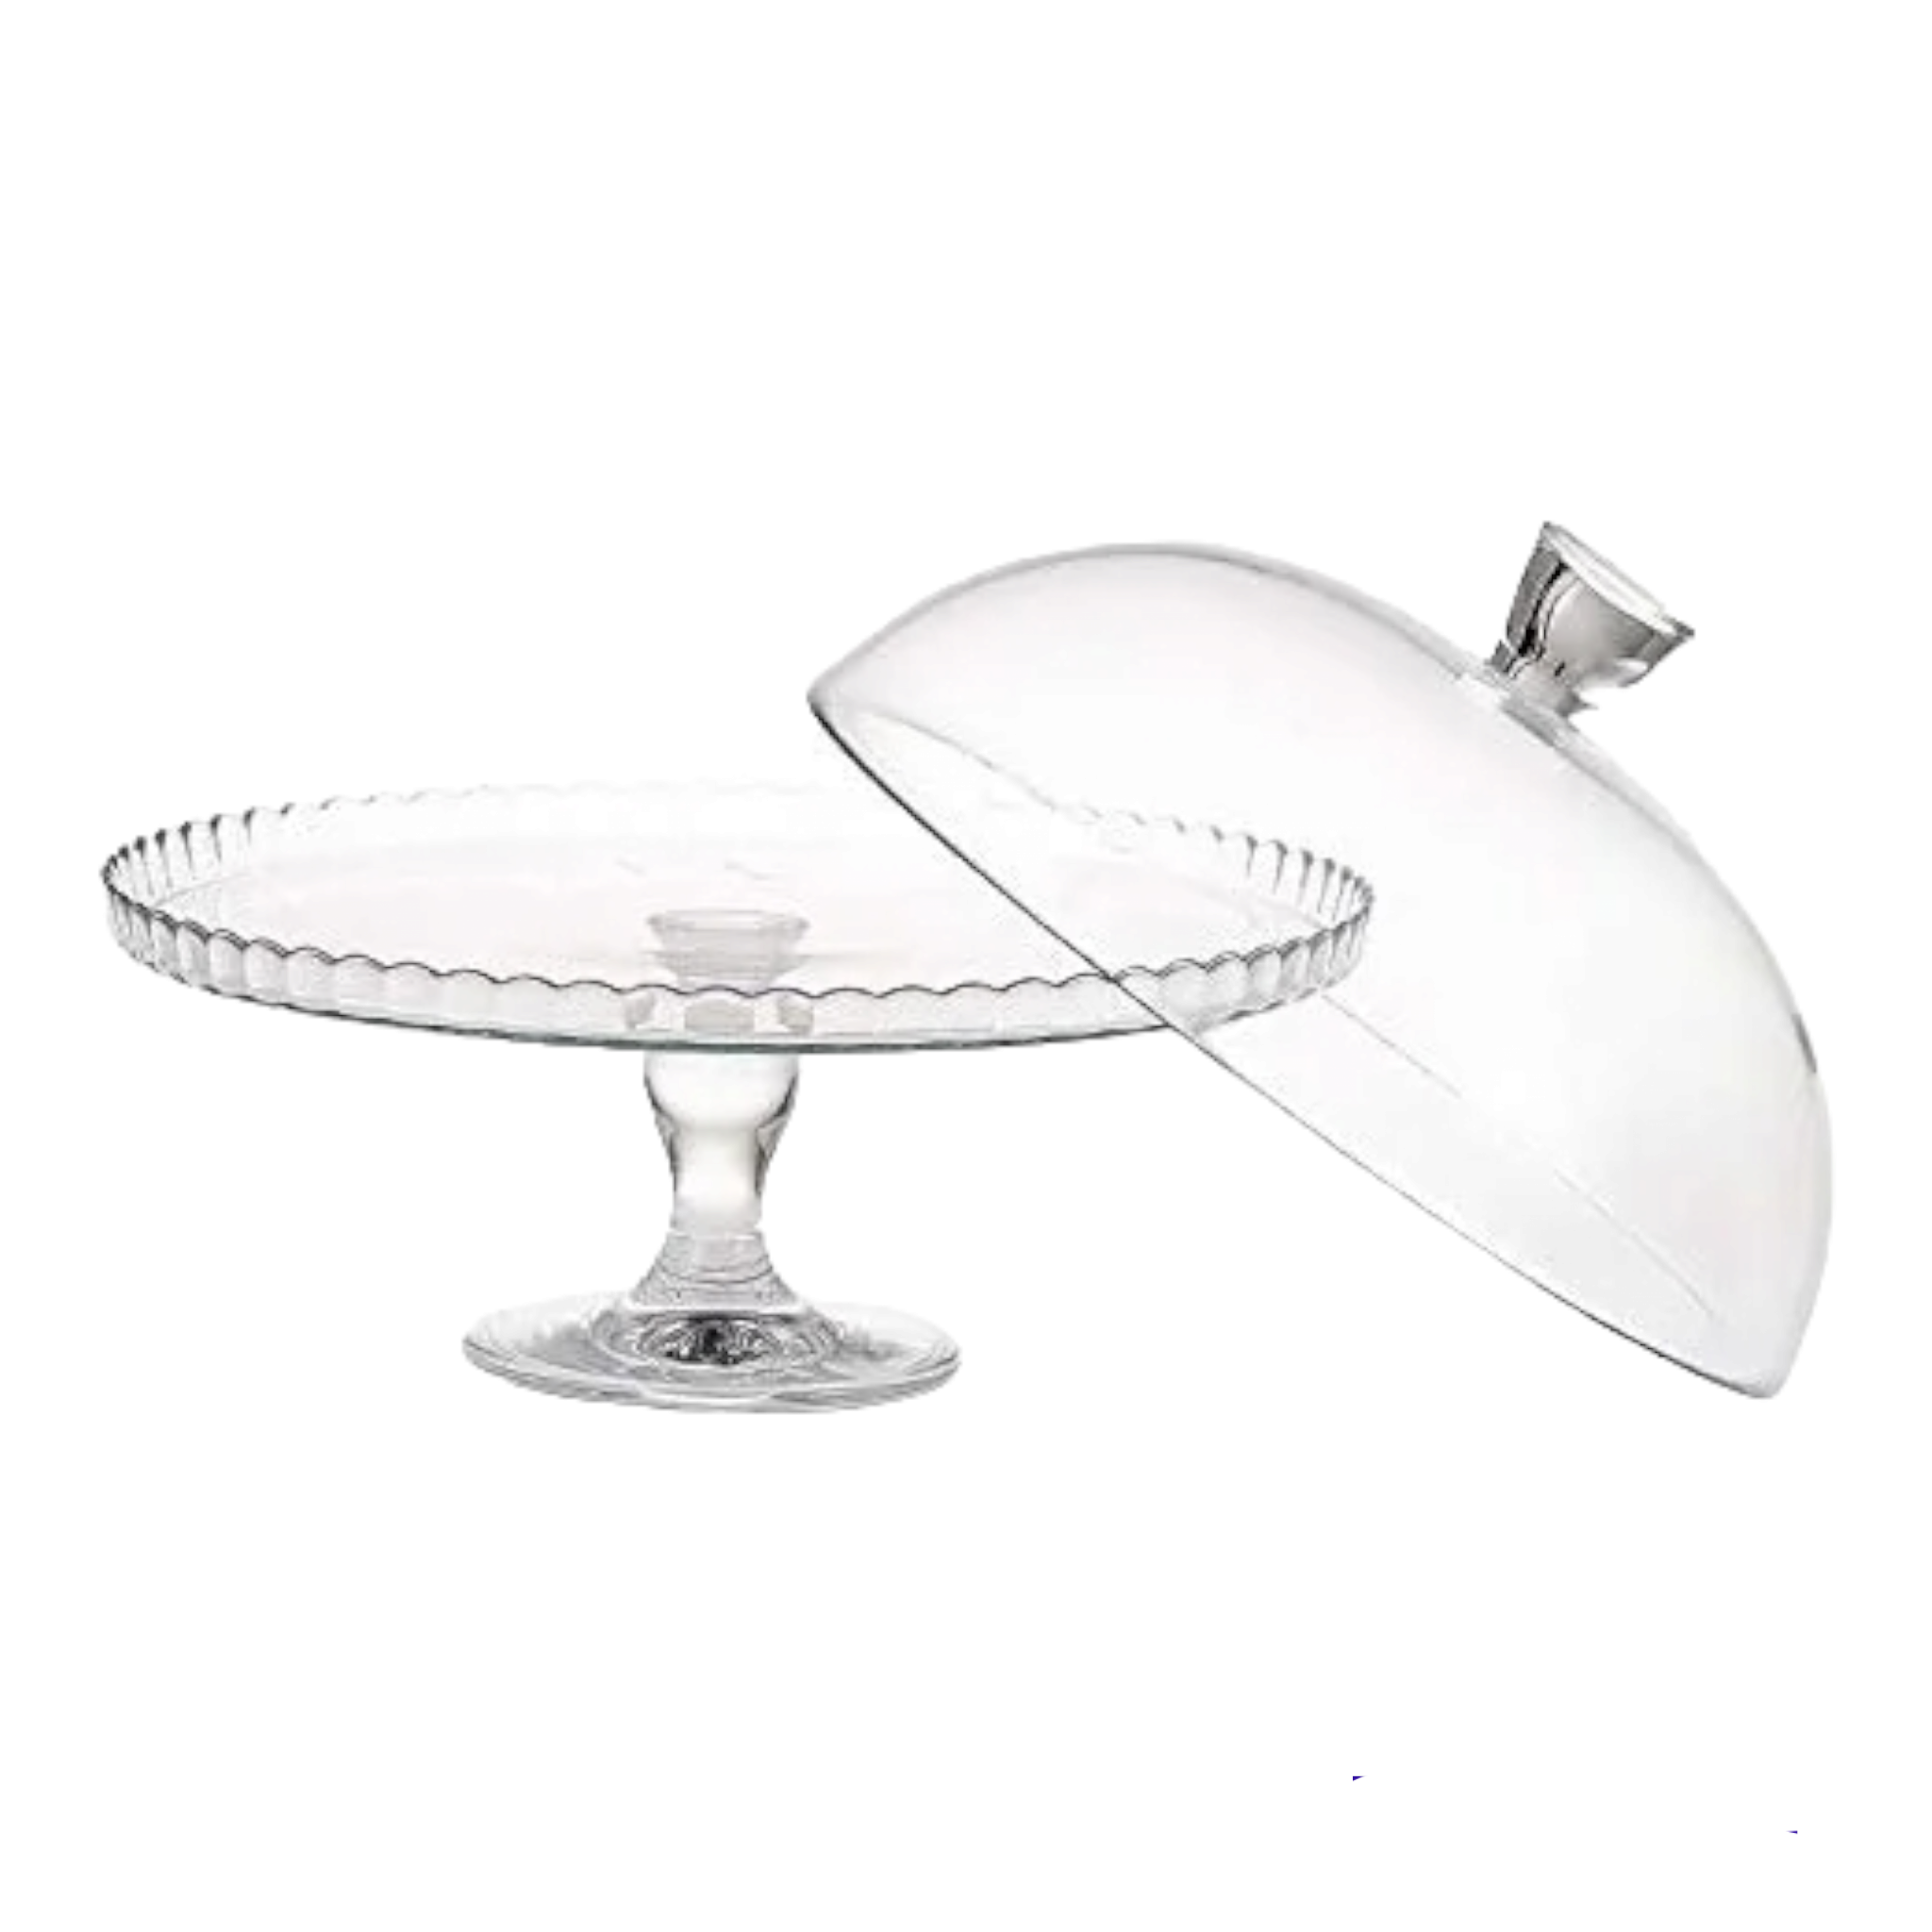 Pasabahce Patisserie Cake Server Dome Footed Stand 322mm 23034